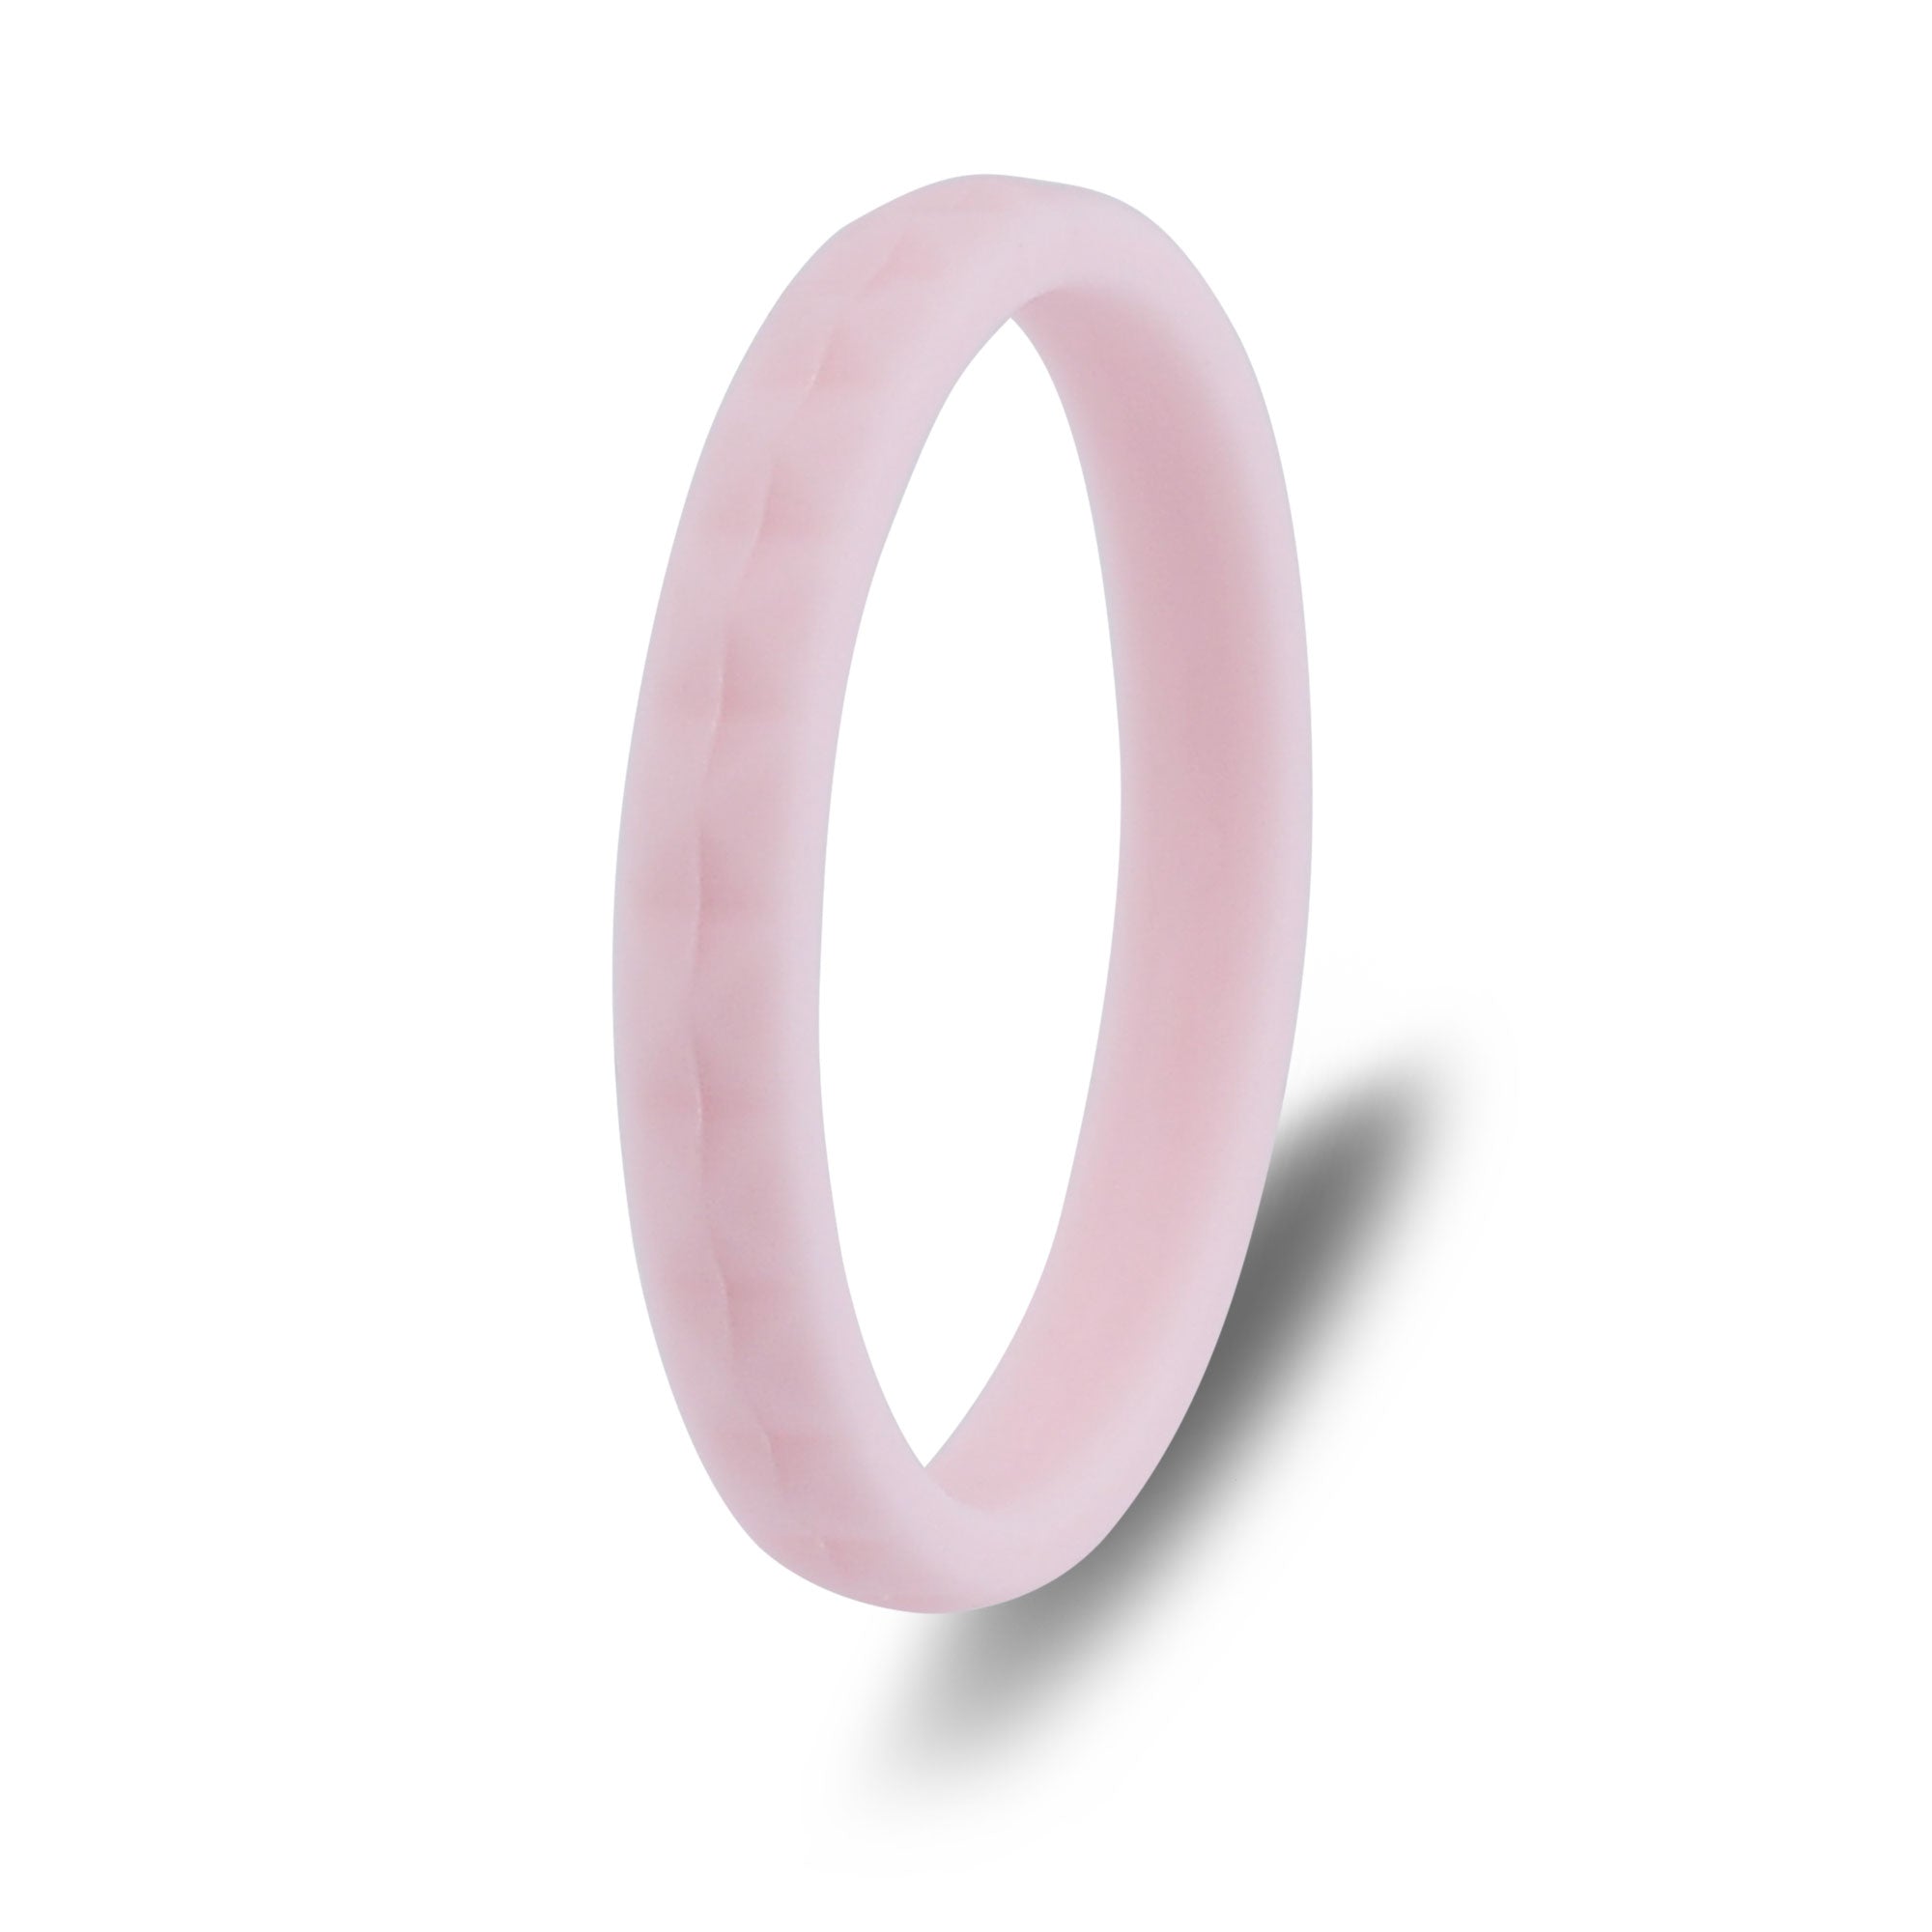 The Pink Lemonade - Silicone Ring